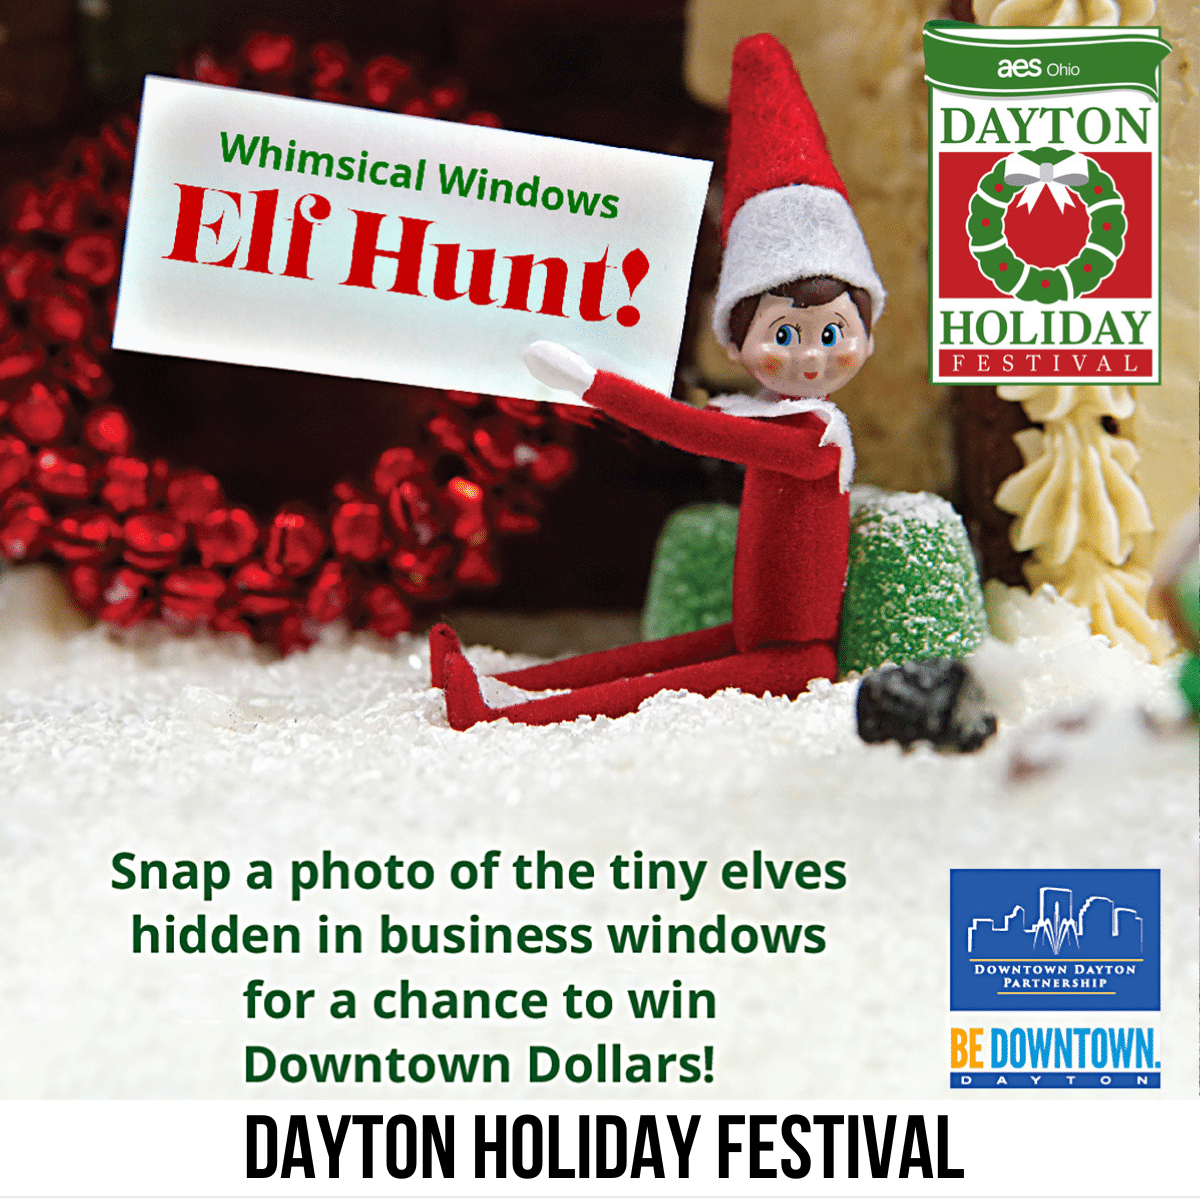 square image with a photo of the information for the Whimsical Windows Elf Hunt at the Dayton Holiday Festival. The text is: Snap a photo of the tiny elves hidden in business windows for a chance to win Downtown Dollars. Image courtesy of Dayton Holiday Festival